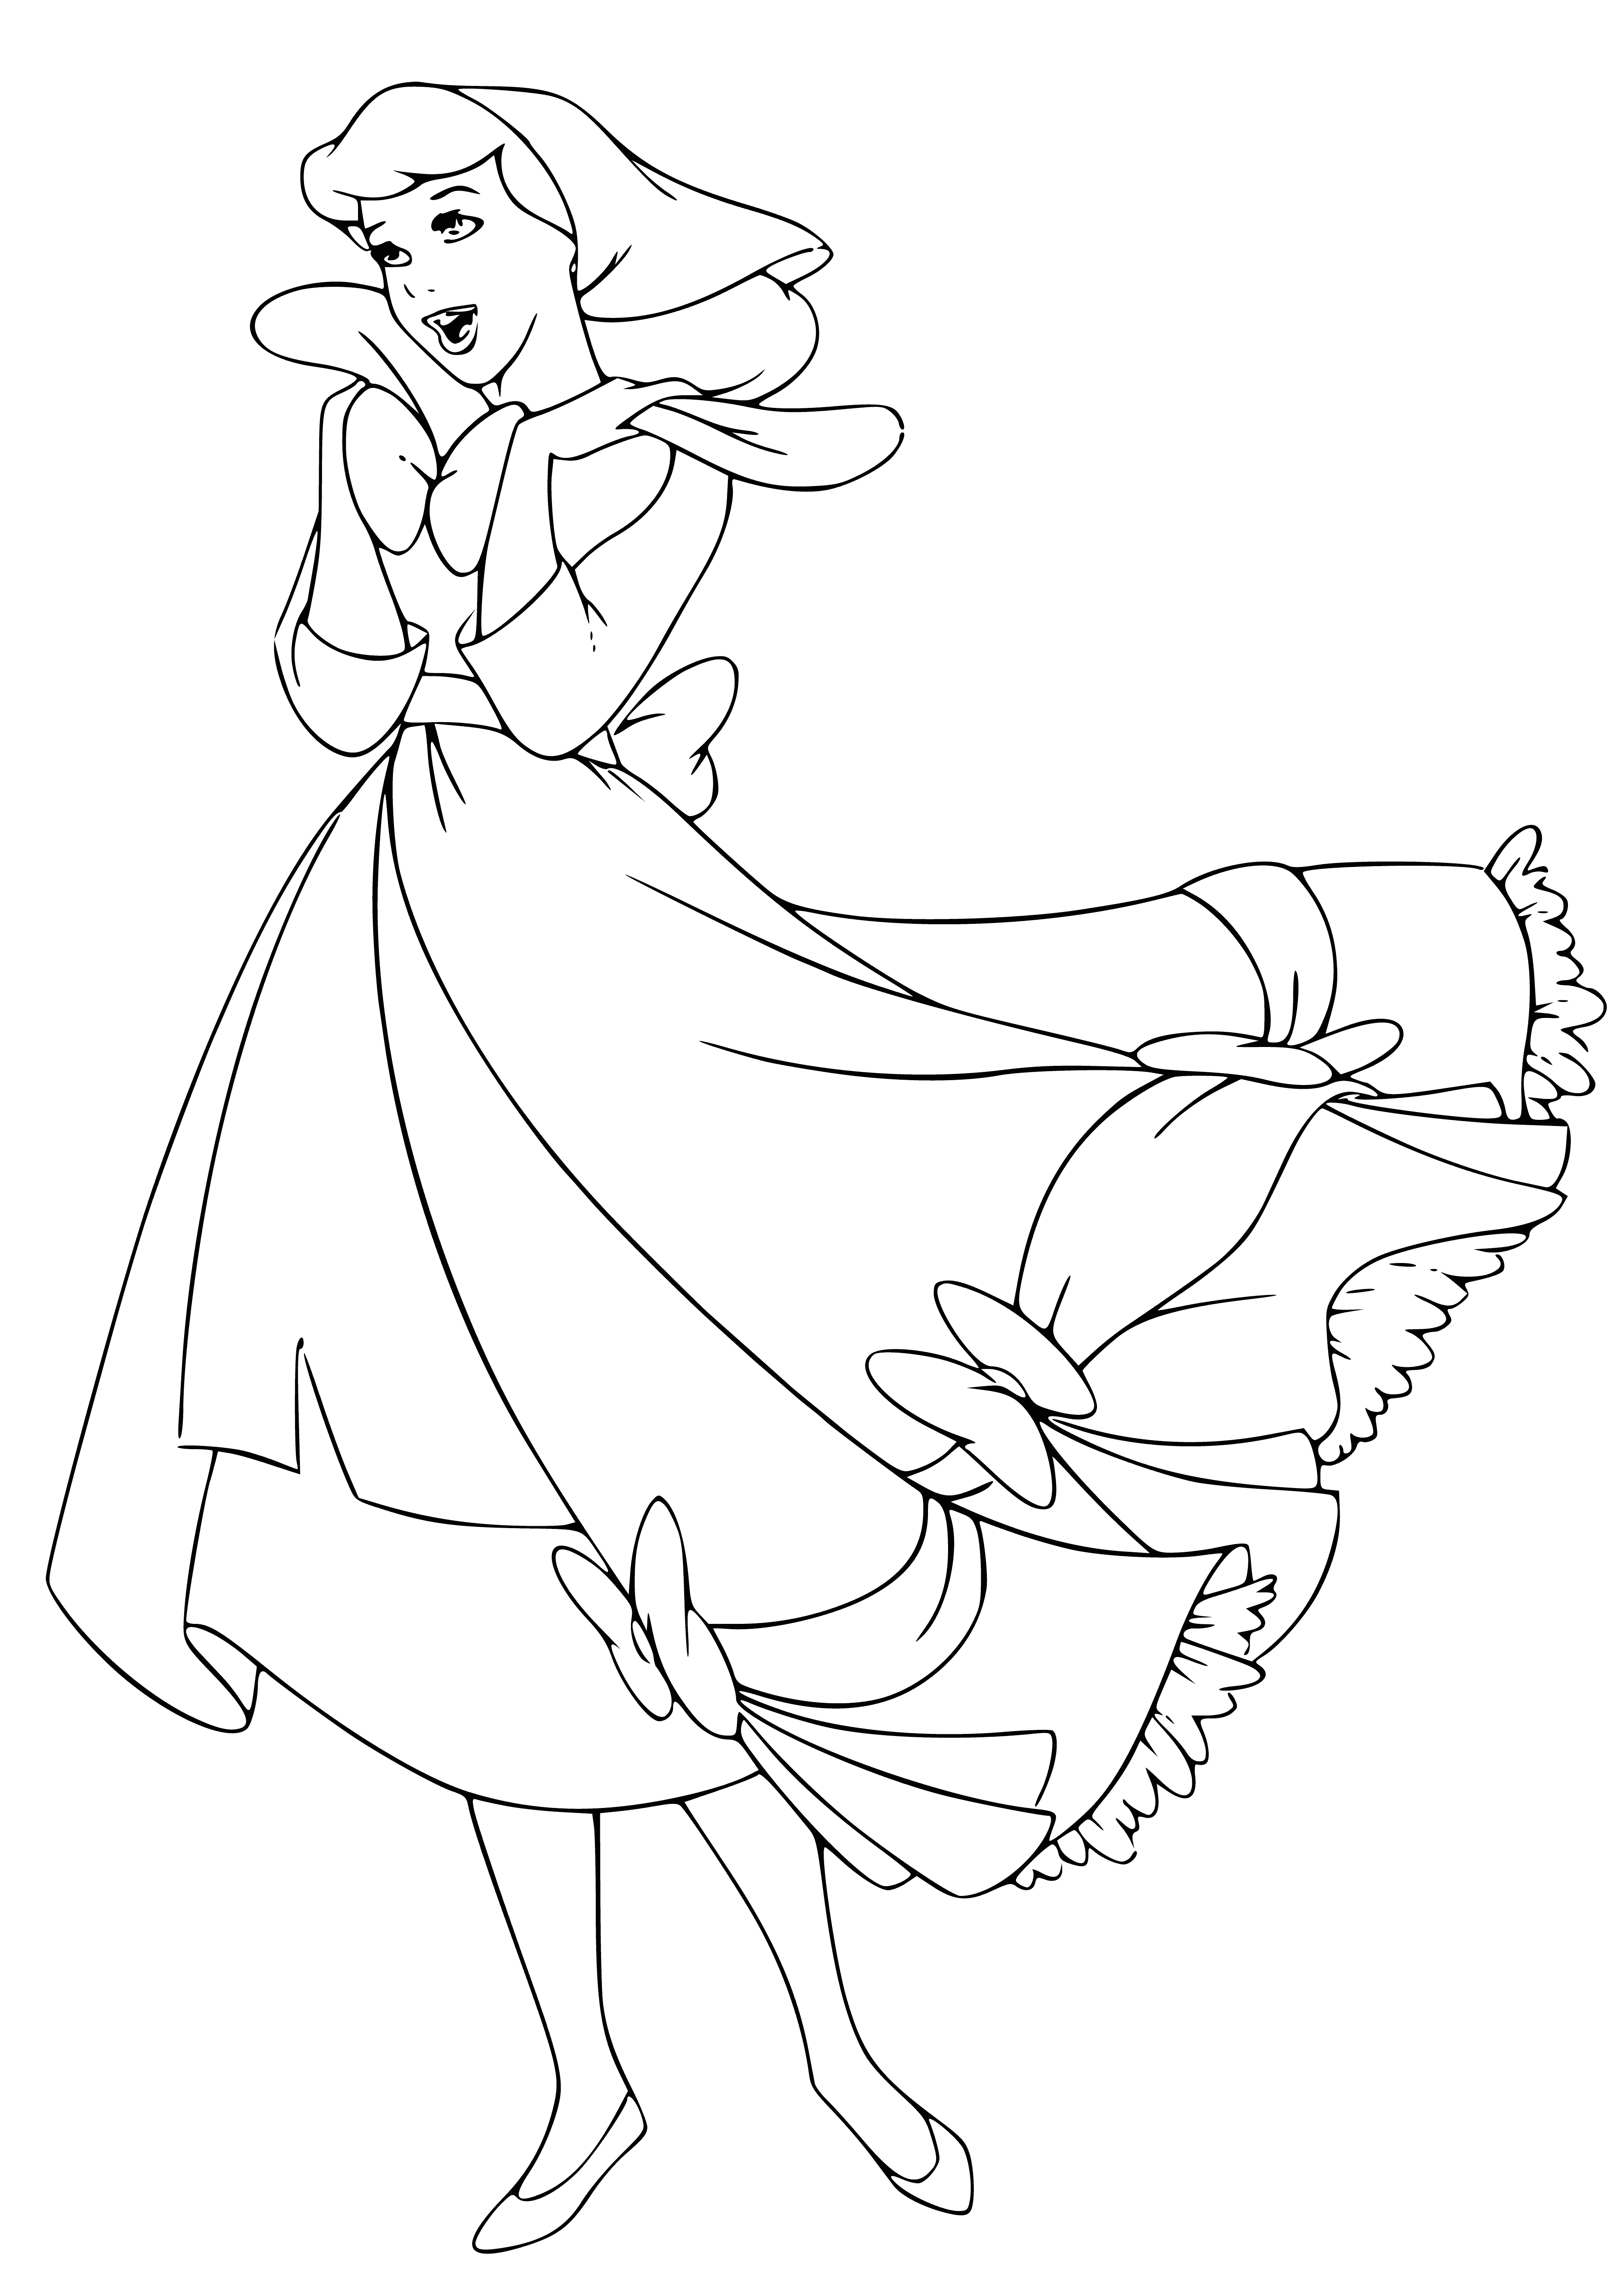 coloring page: : Little girl is happy as she stands in front of the mirror admiring her lovely dress. #GirlPower